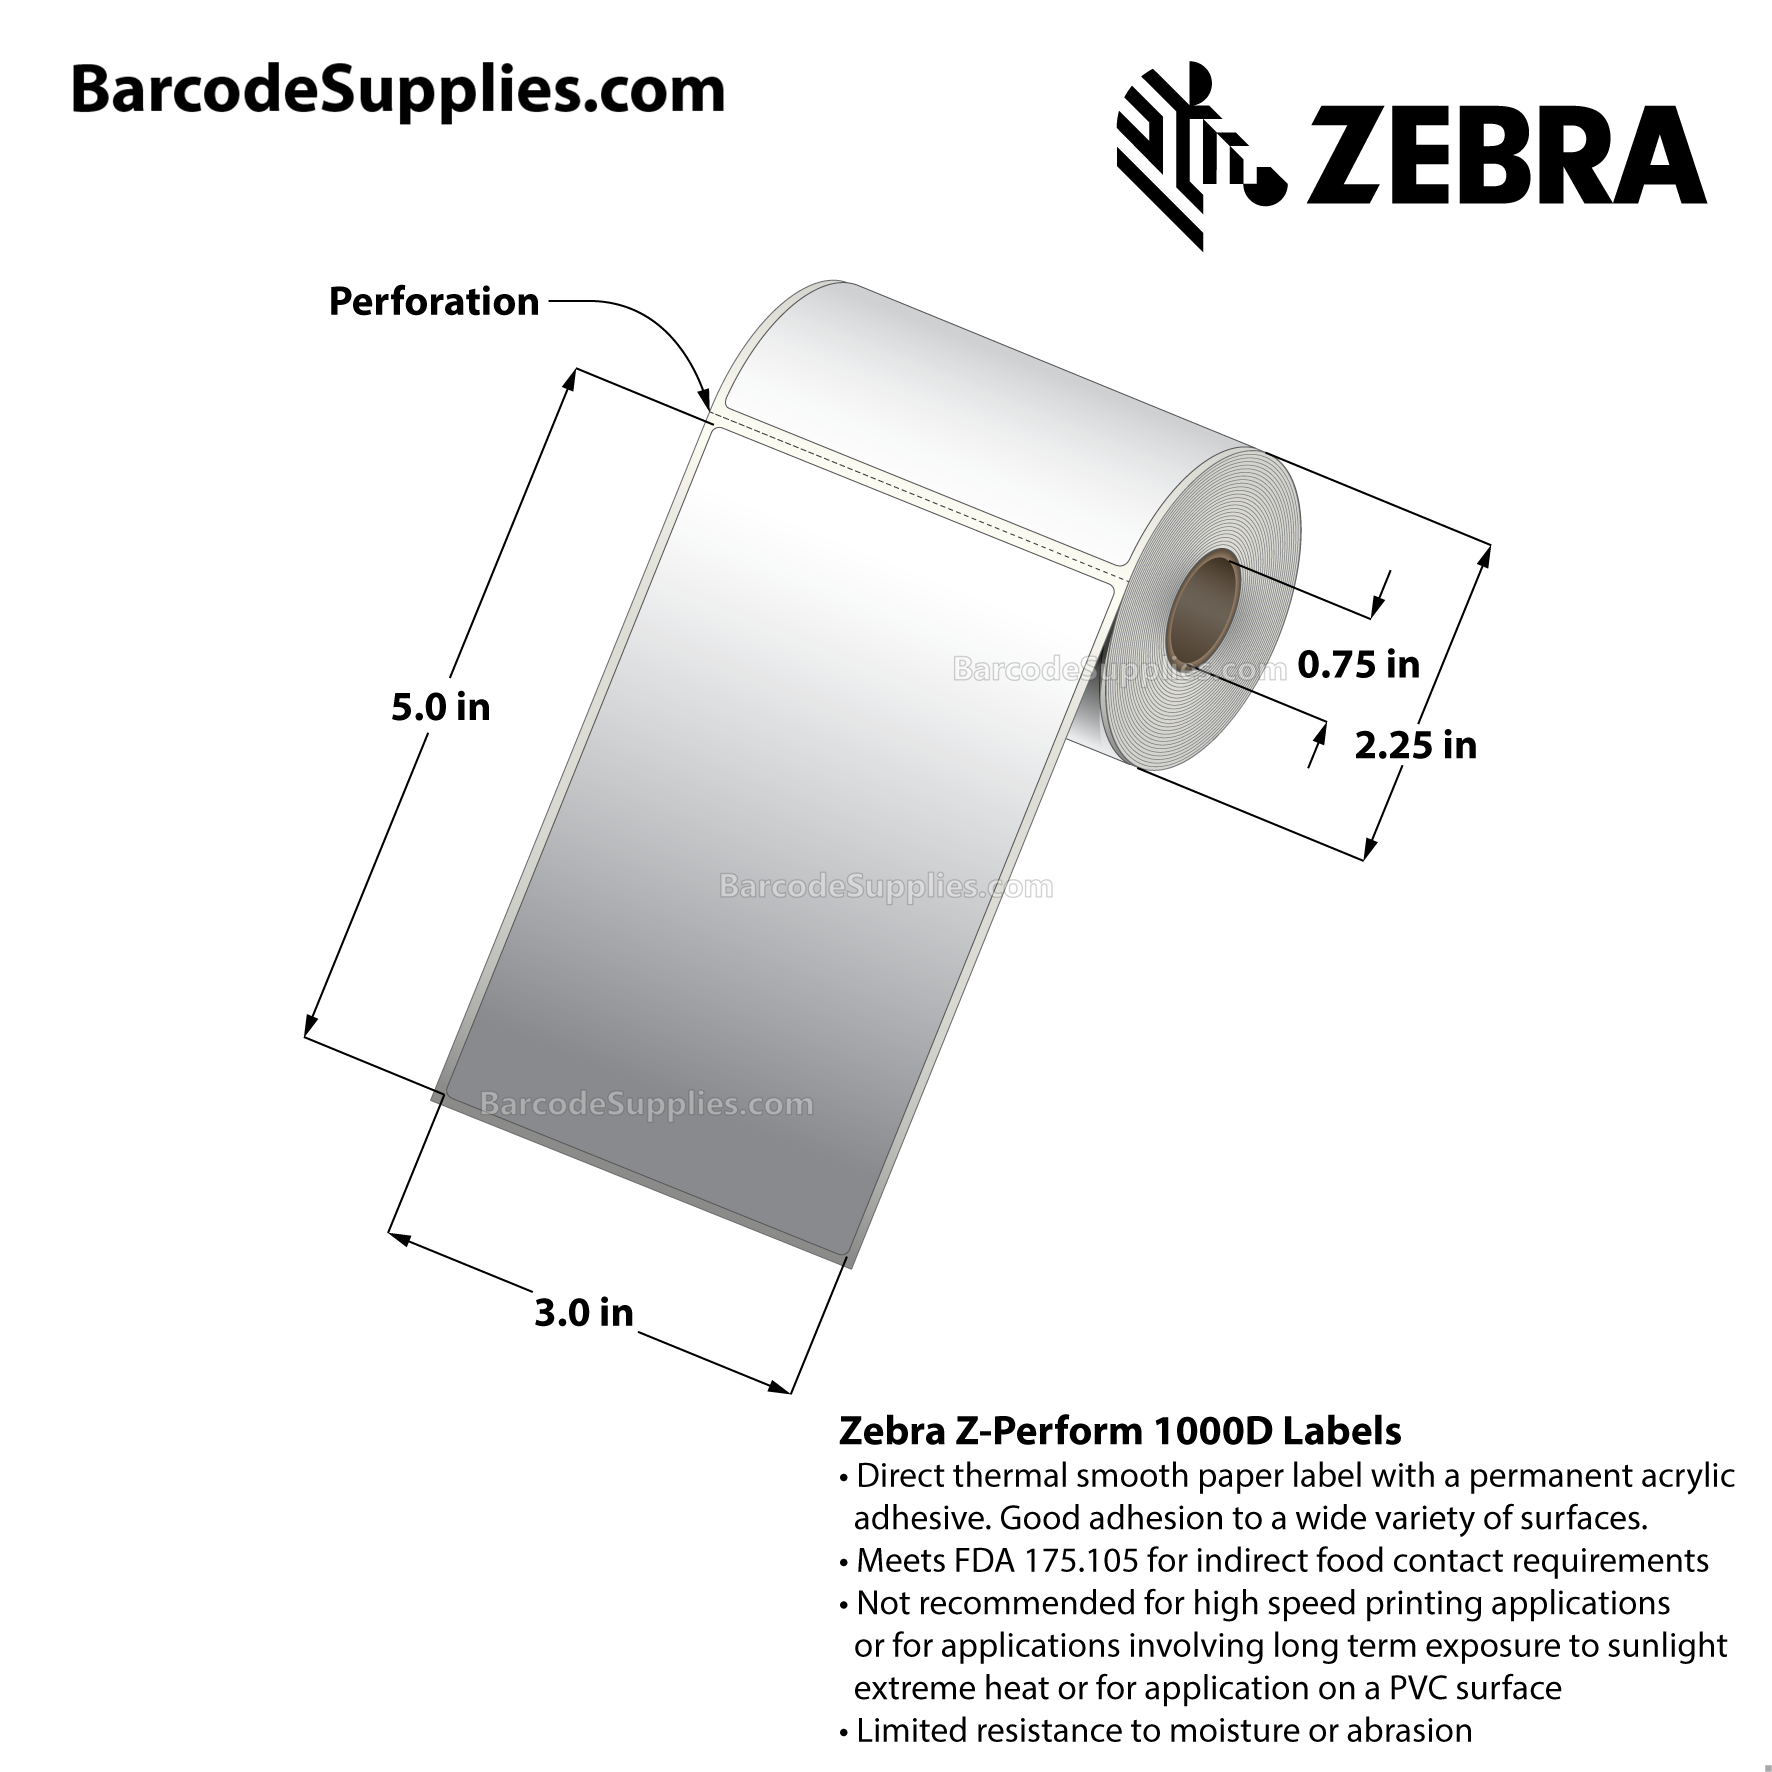 3 x 5 Direct Thermal White Z-Perform 1000D Labels With Permanent Adhesive - Perforated - 95 Labels Per Roll - Carton Of 36 Rolls - 3420 Labels Total - MPN: 10026370